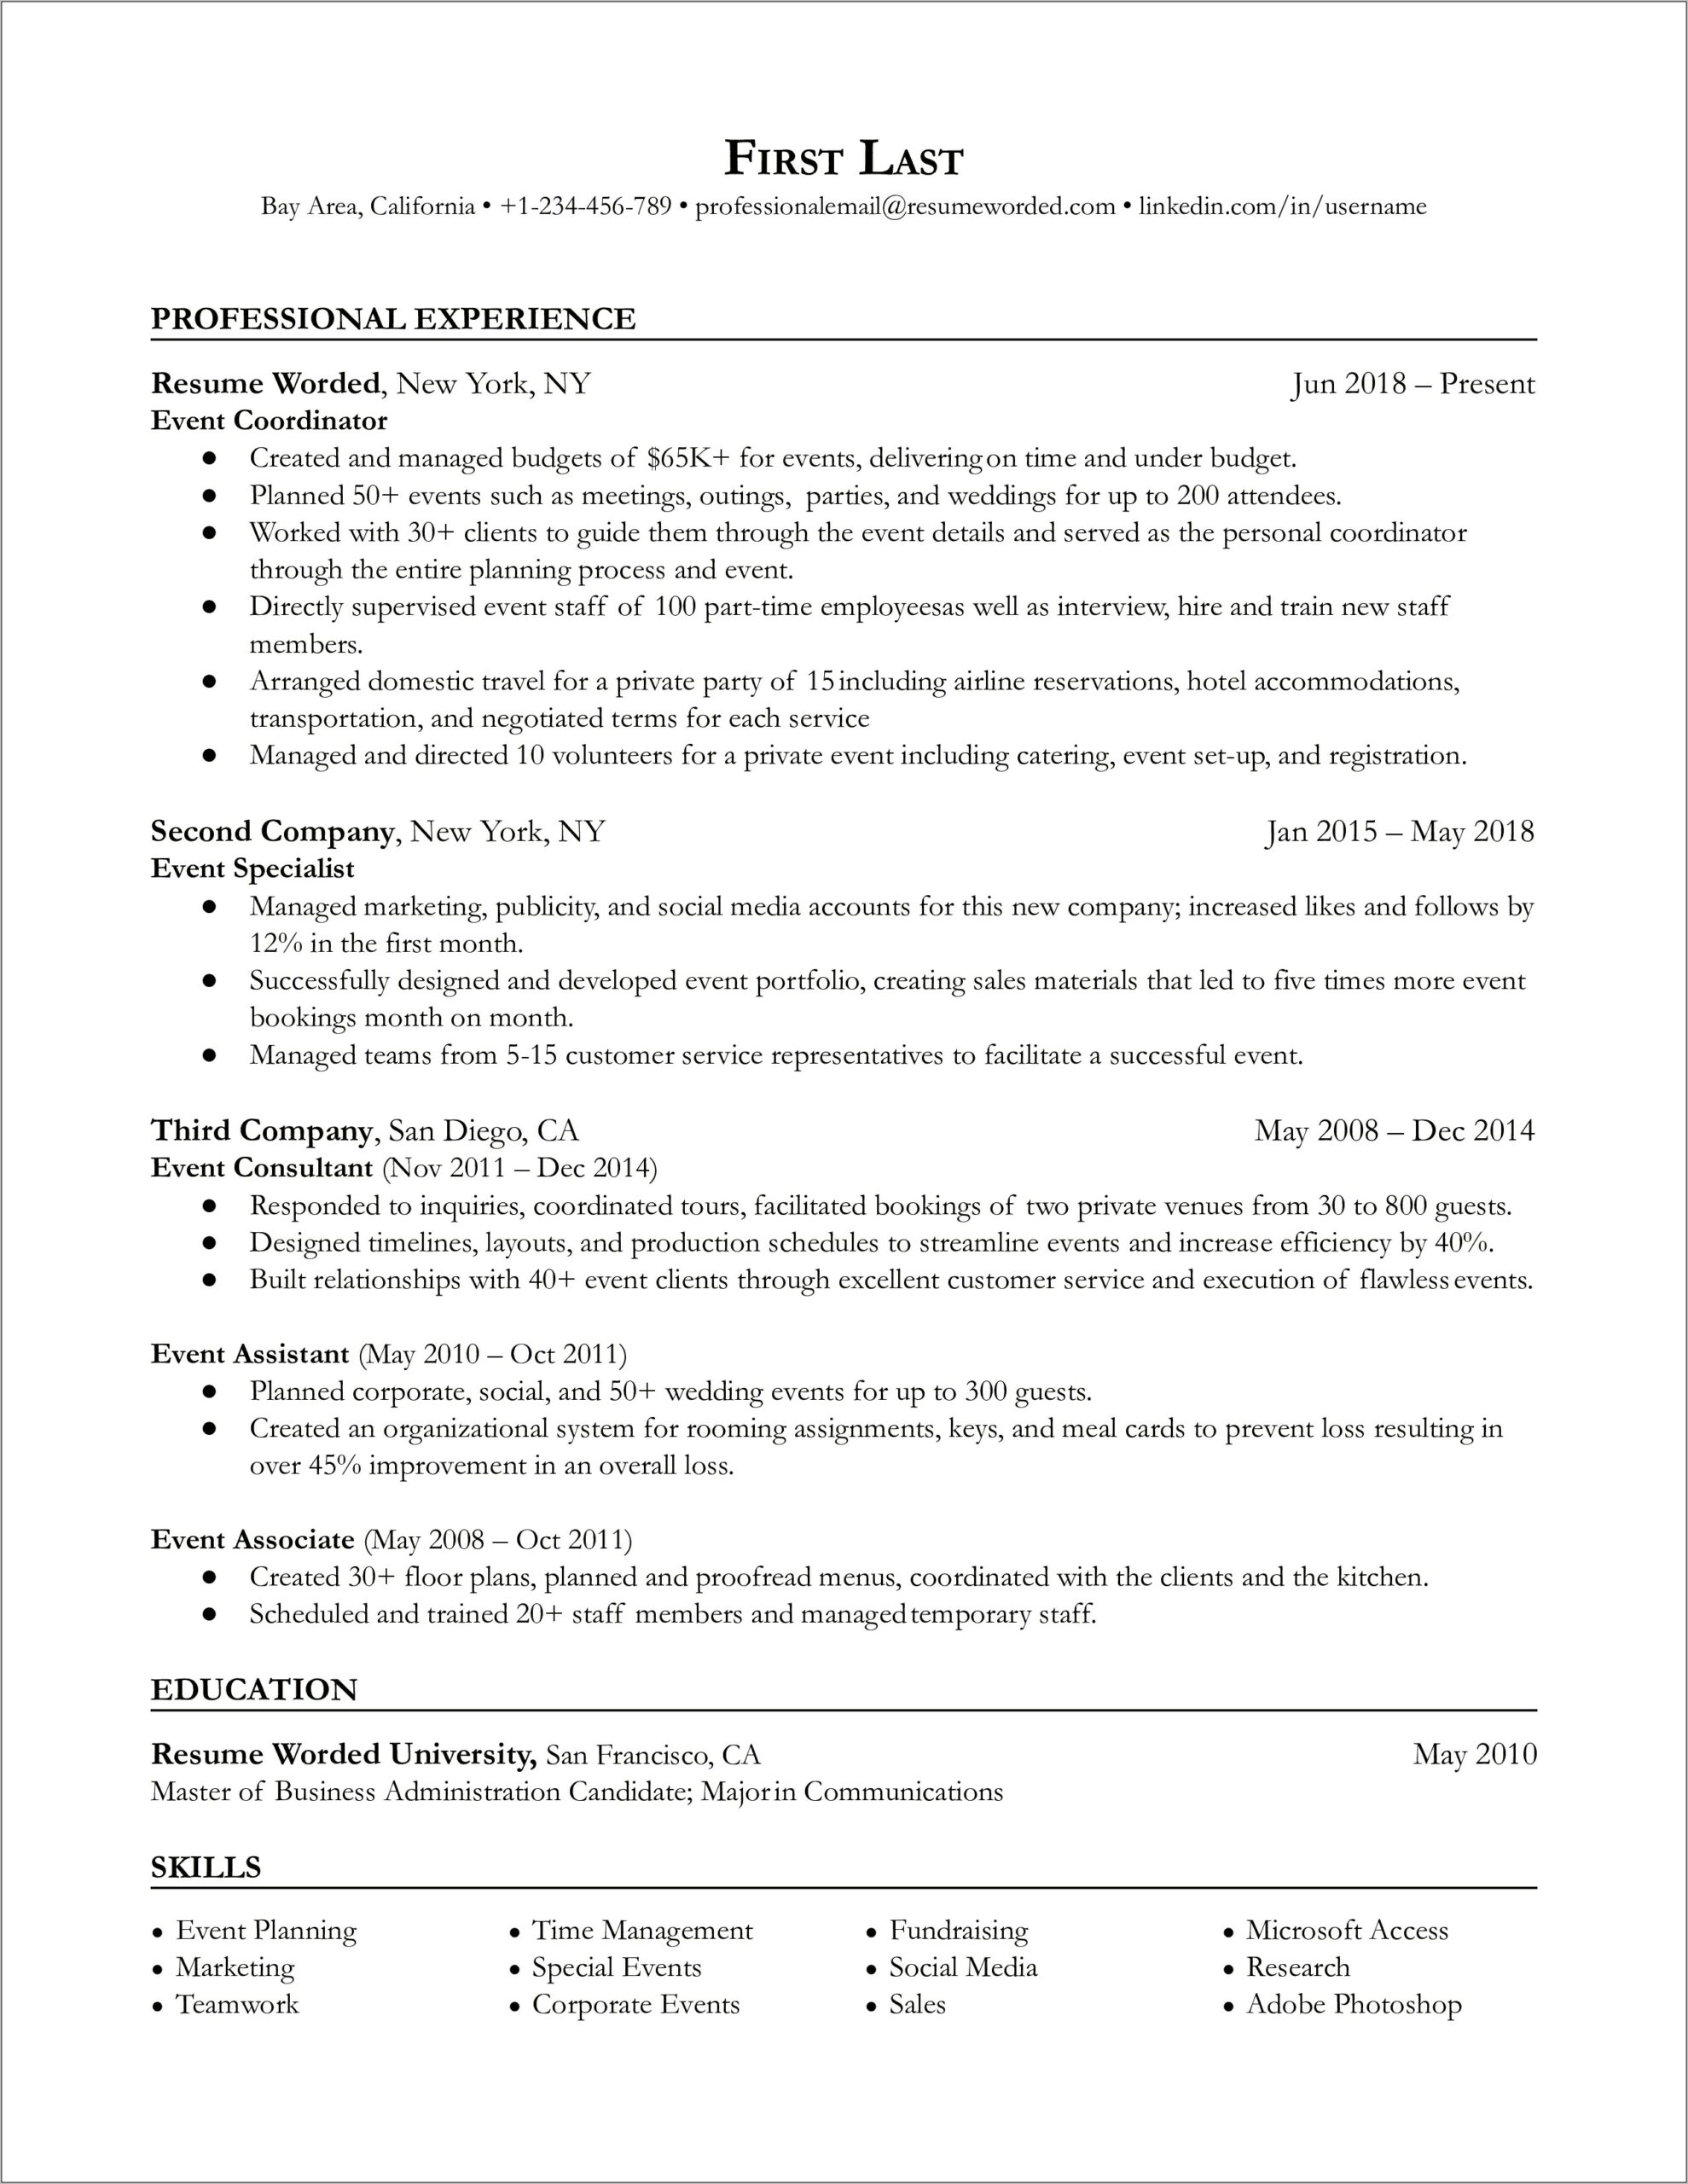 Example Resume For Event Coordinator